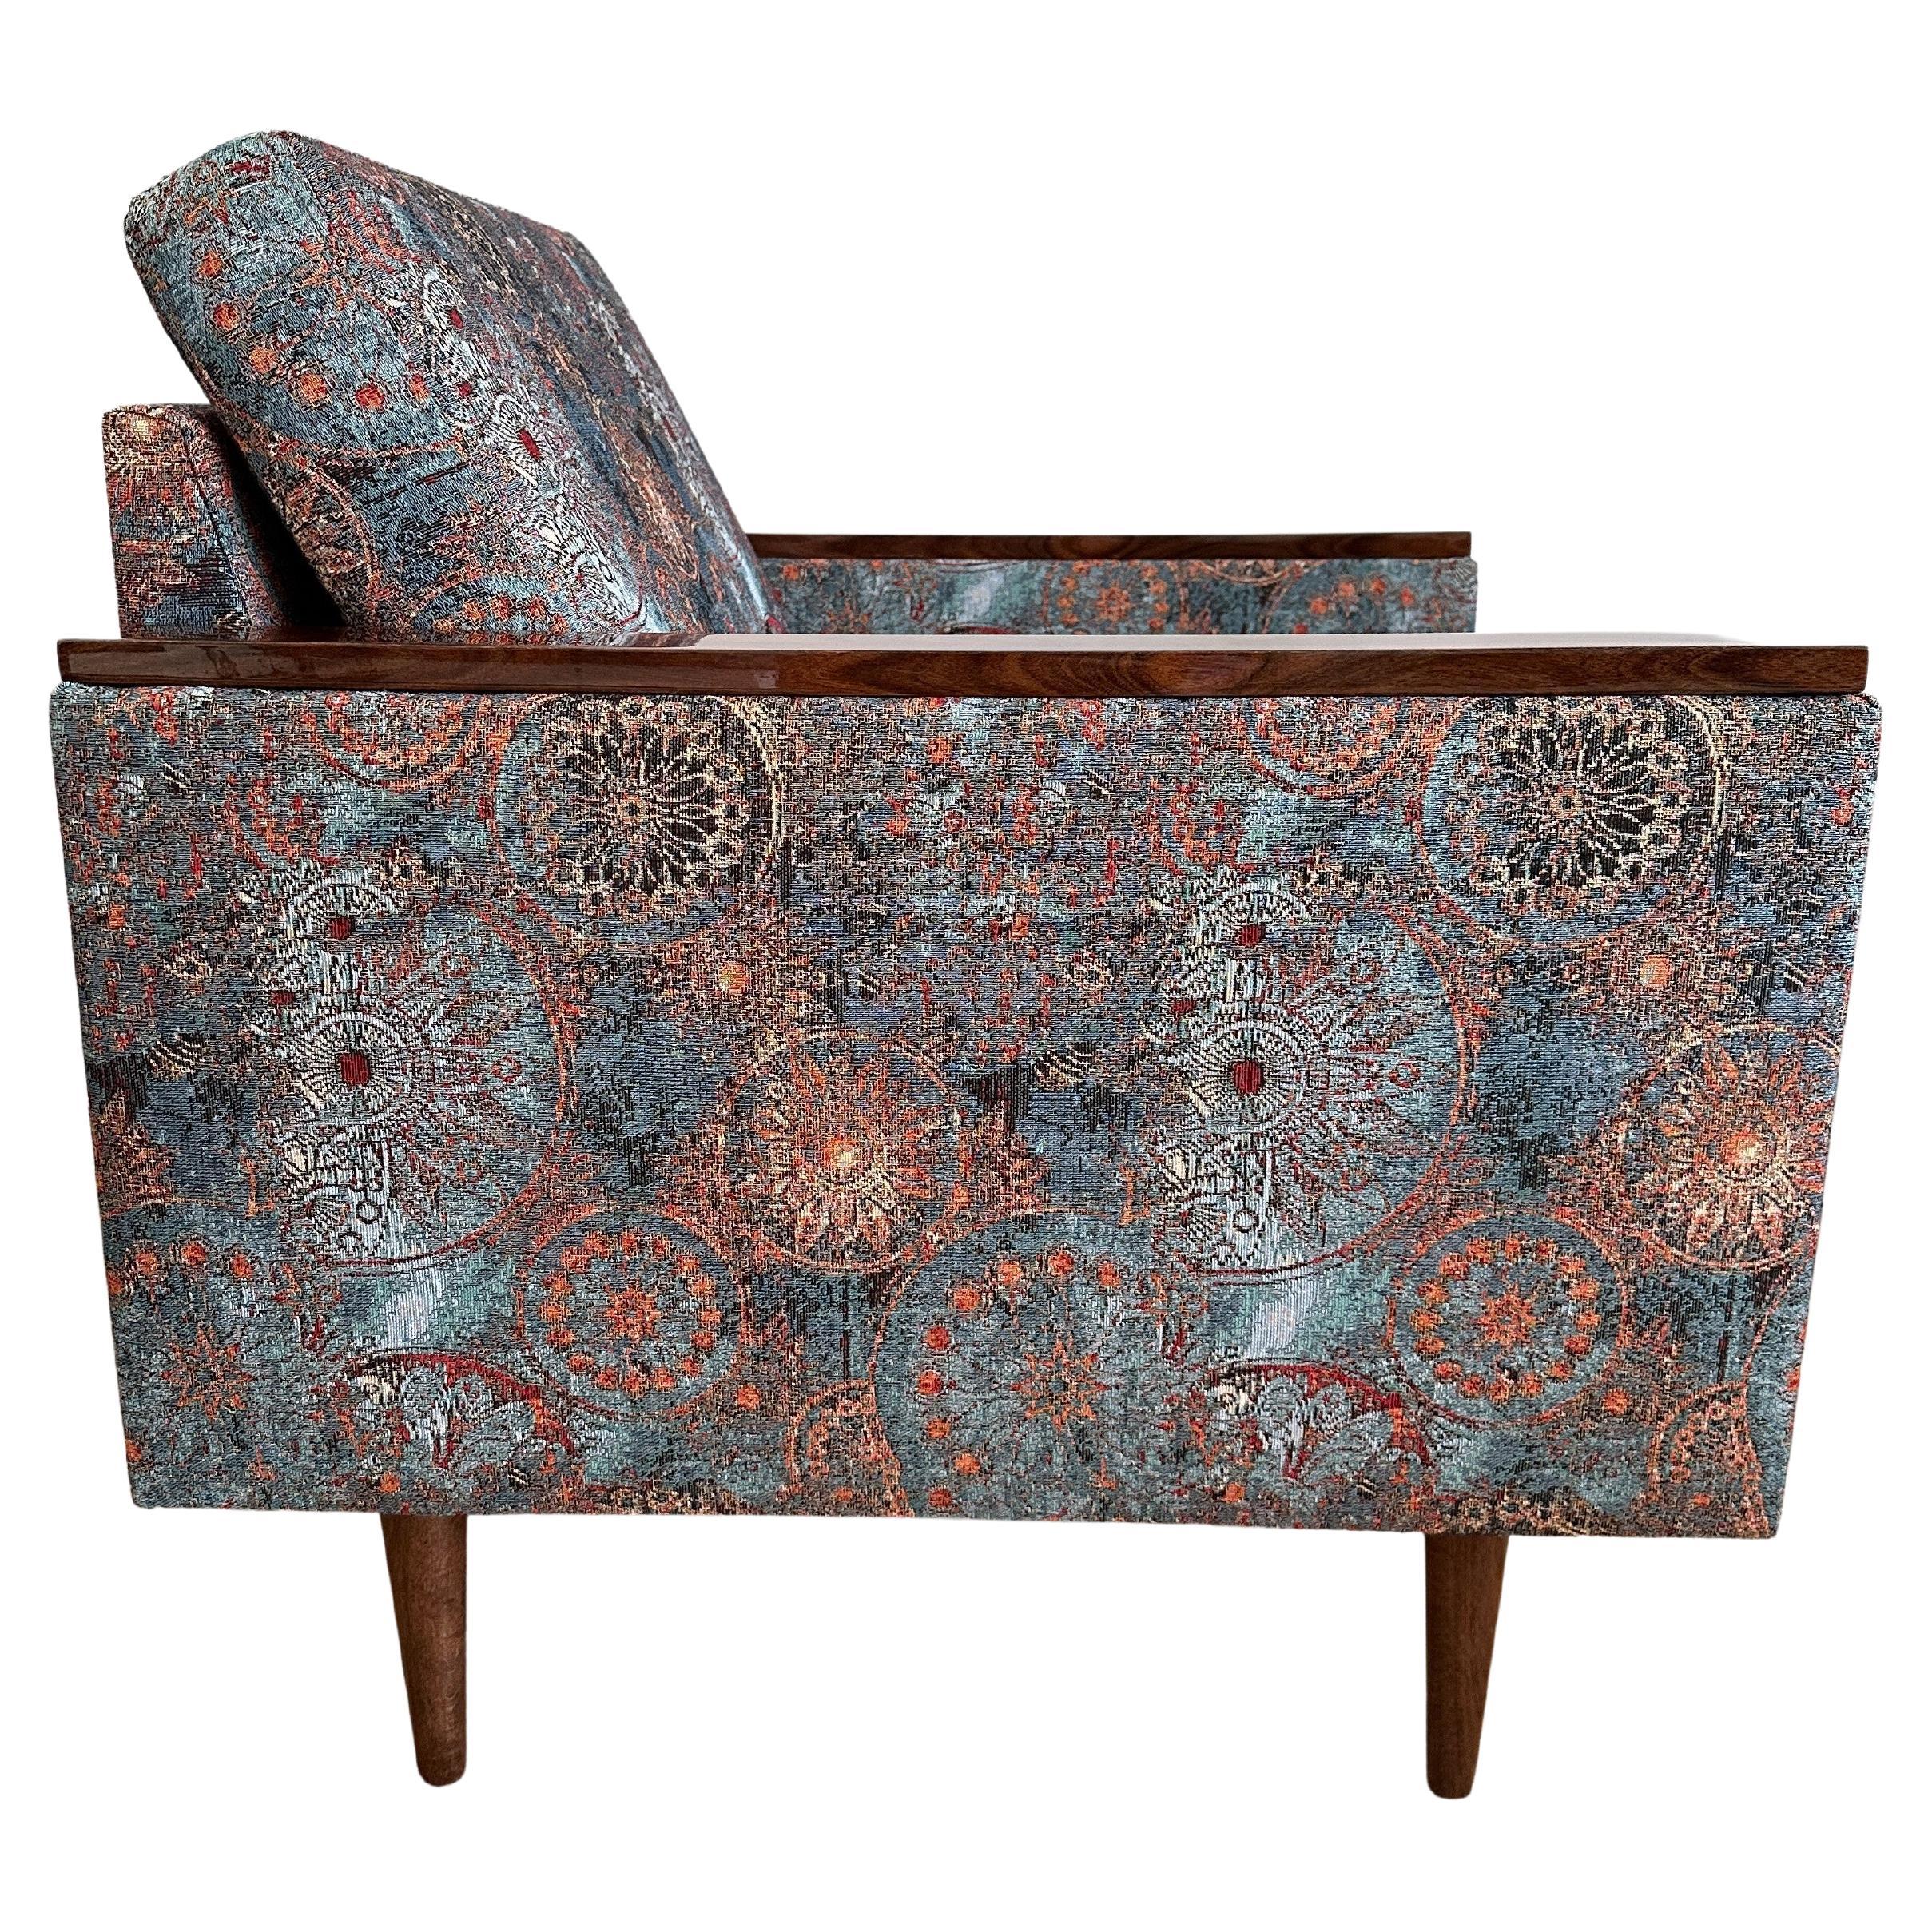 Midcentury Geometric Armchair with Ethnic Pattern, Europe, 1970s For Sale